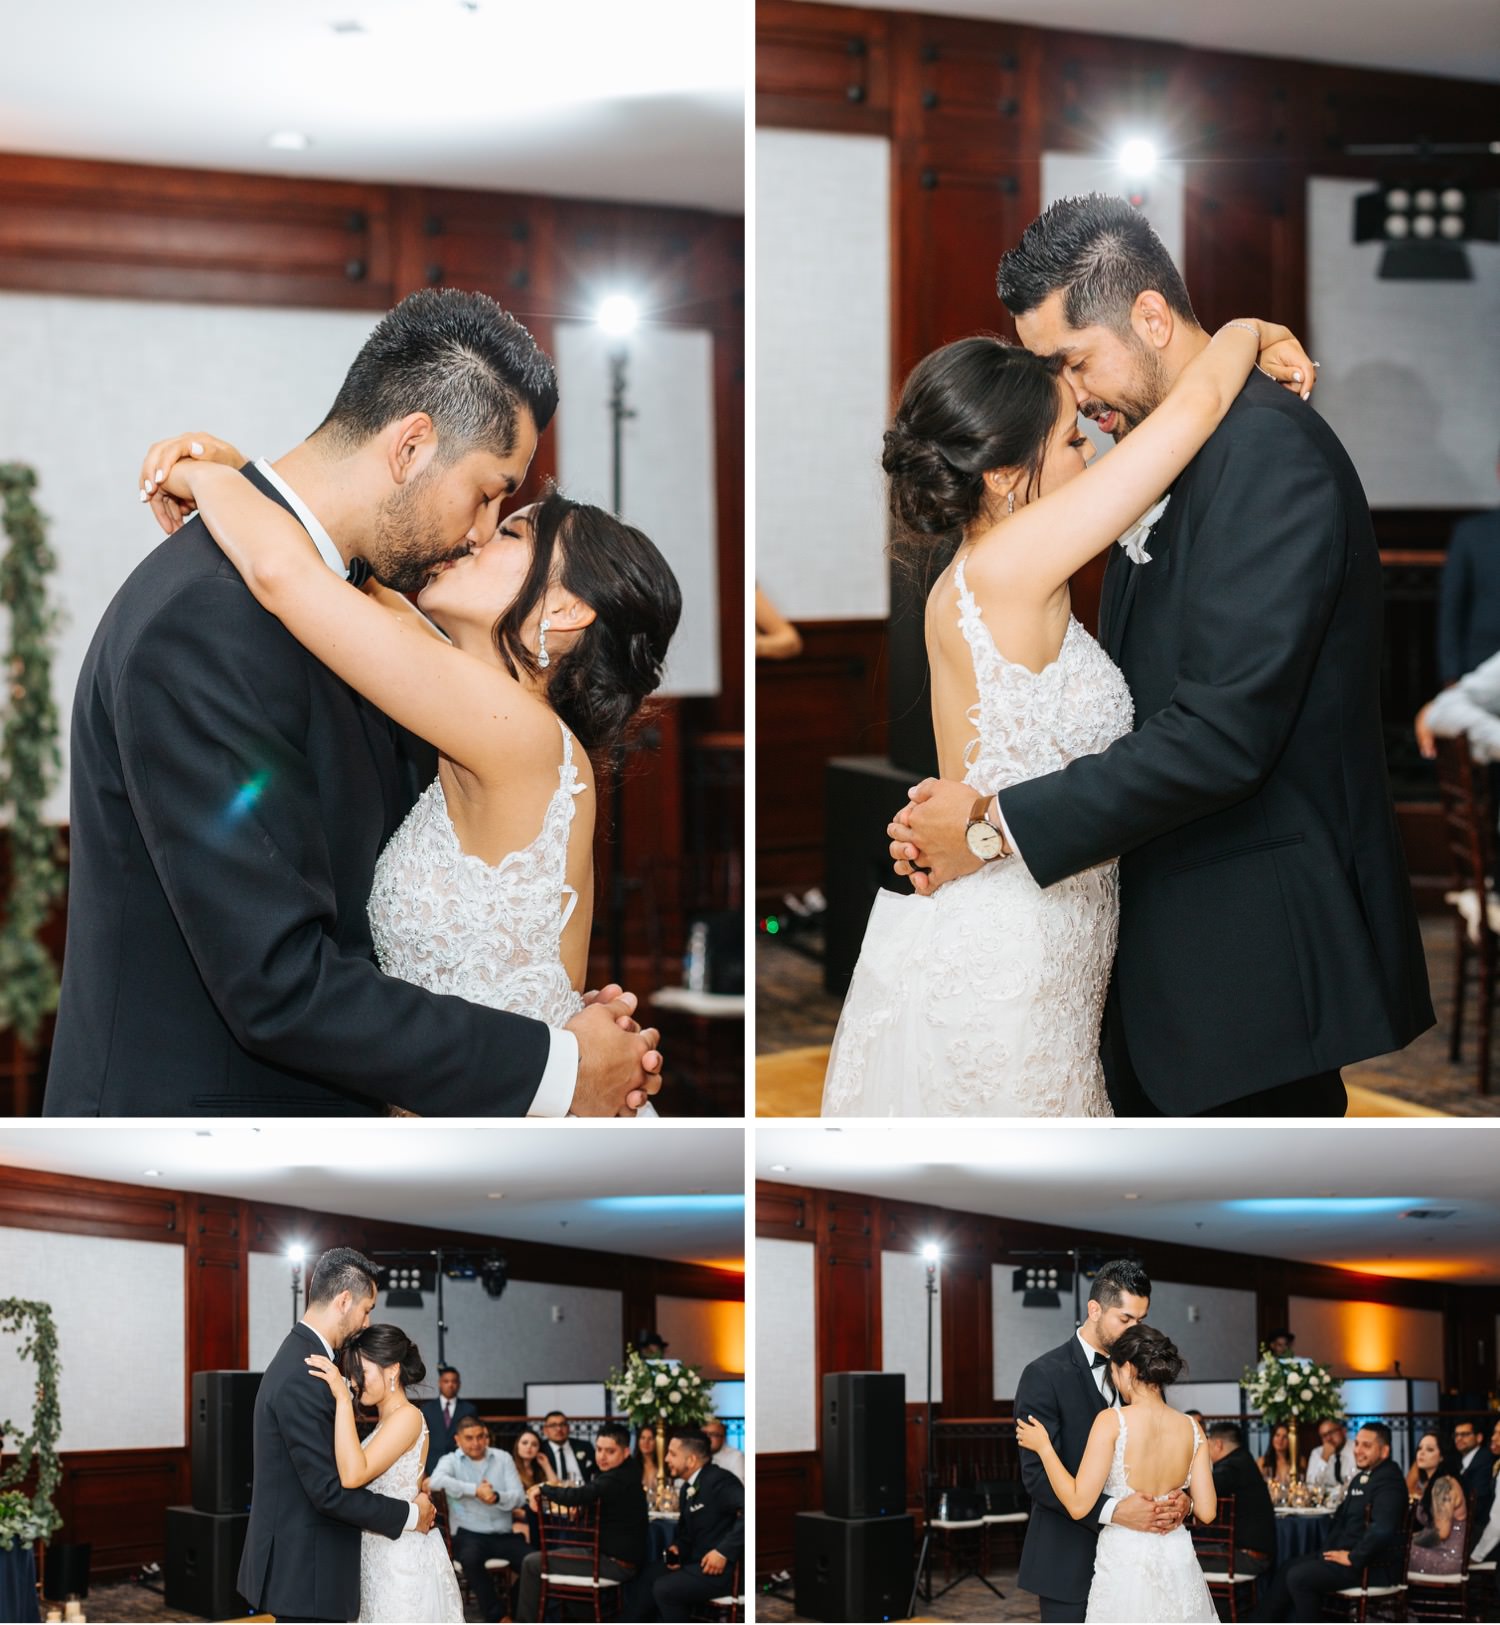 Bride and Groom First Dance - Romantic First Dance between Bride and Groom - https://brittneyhannonphotography.com